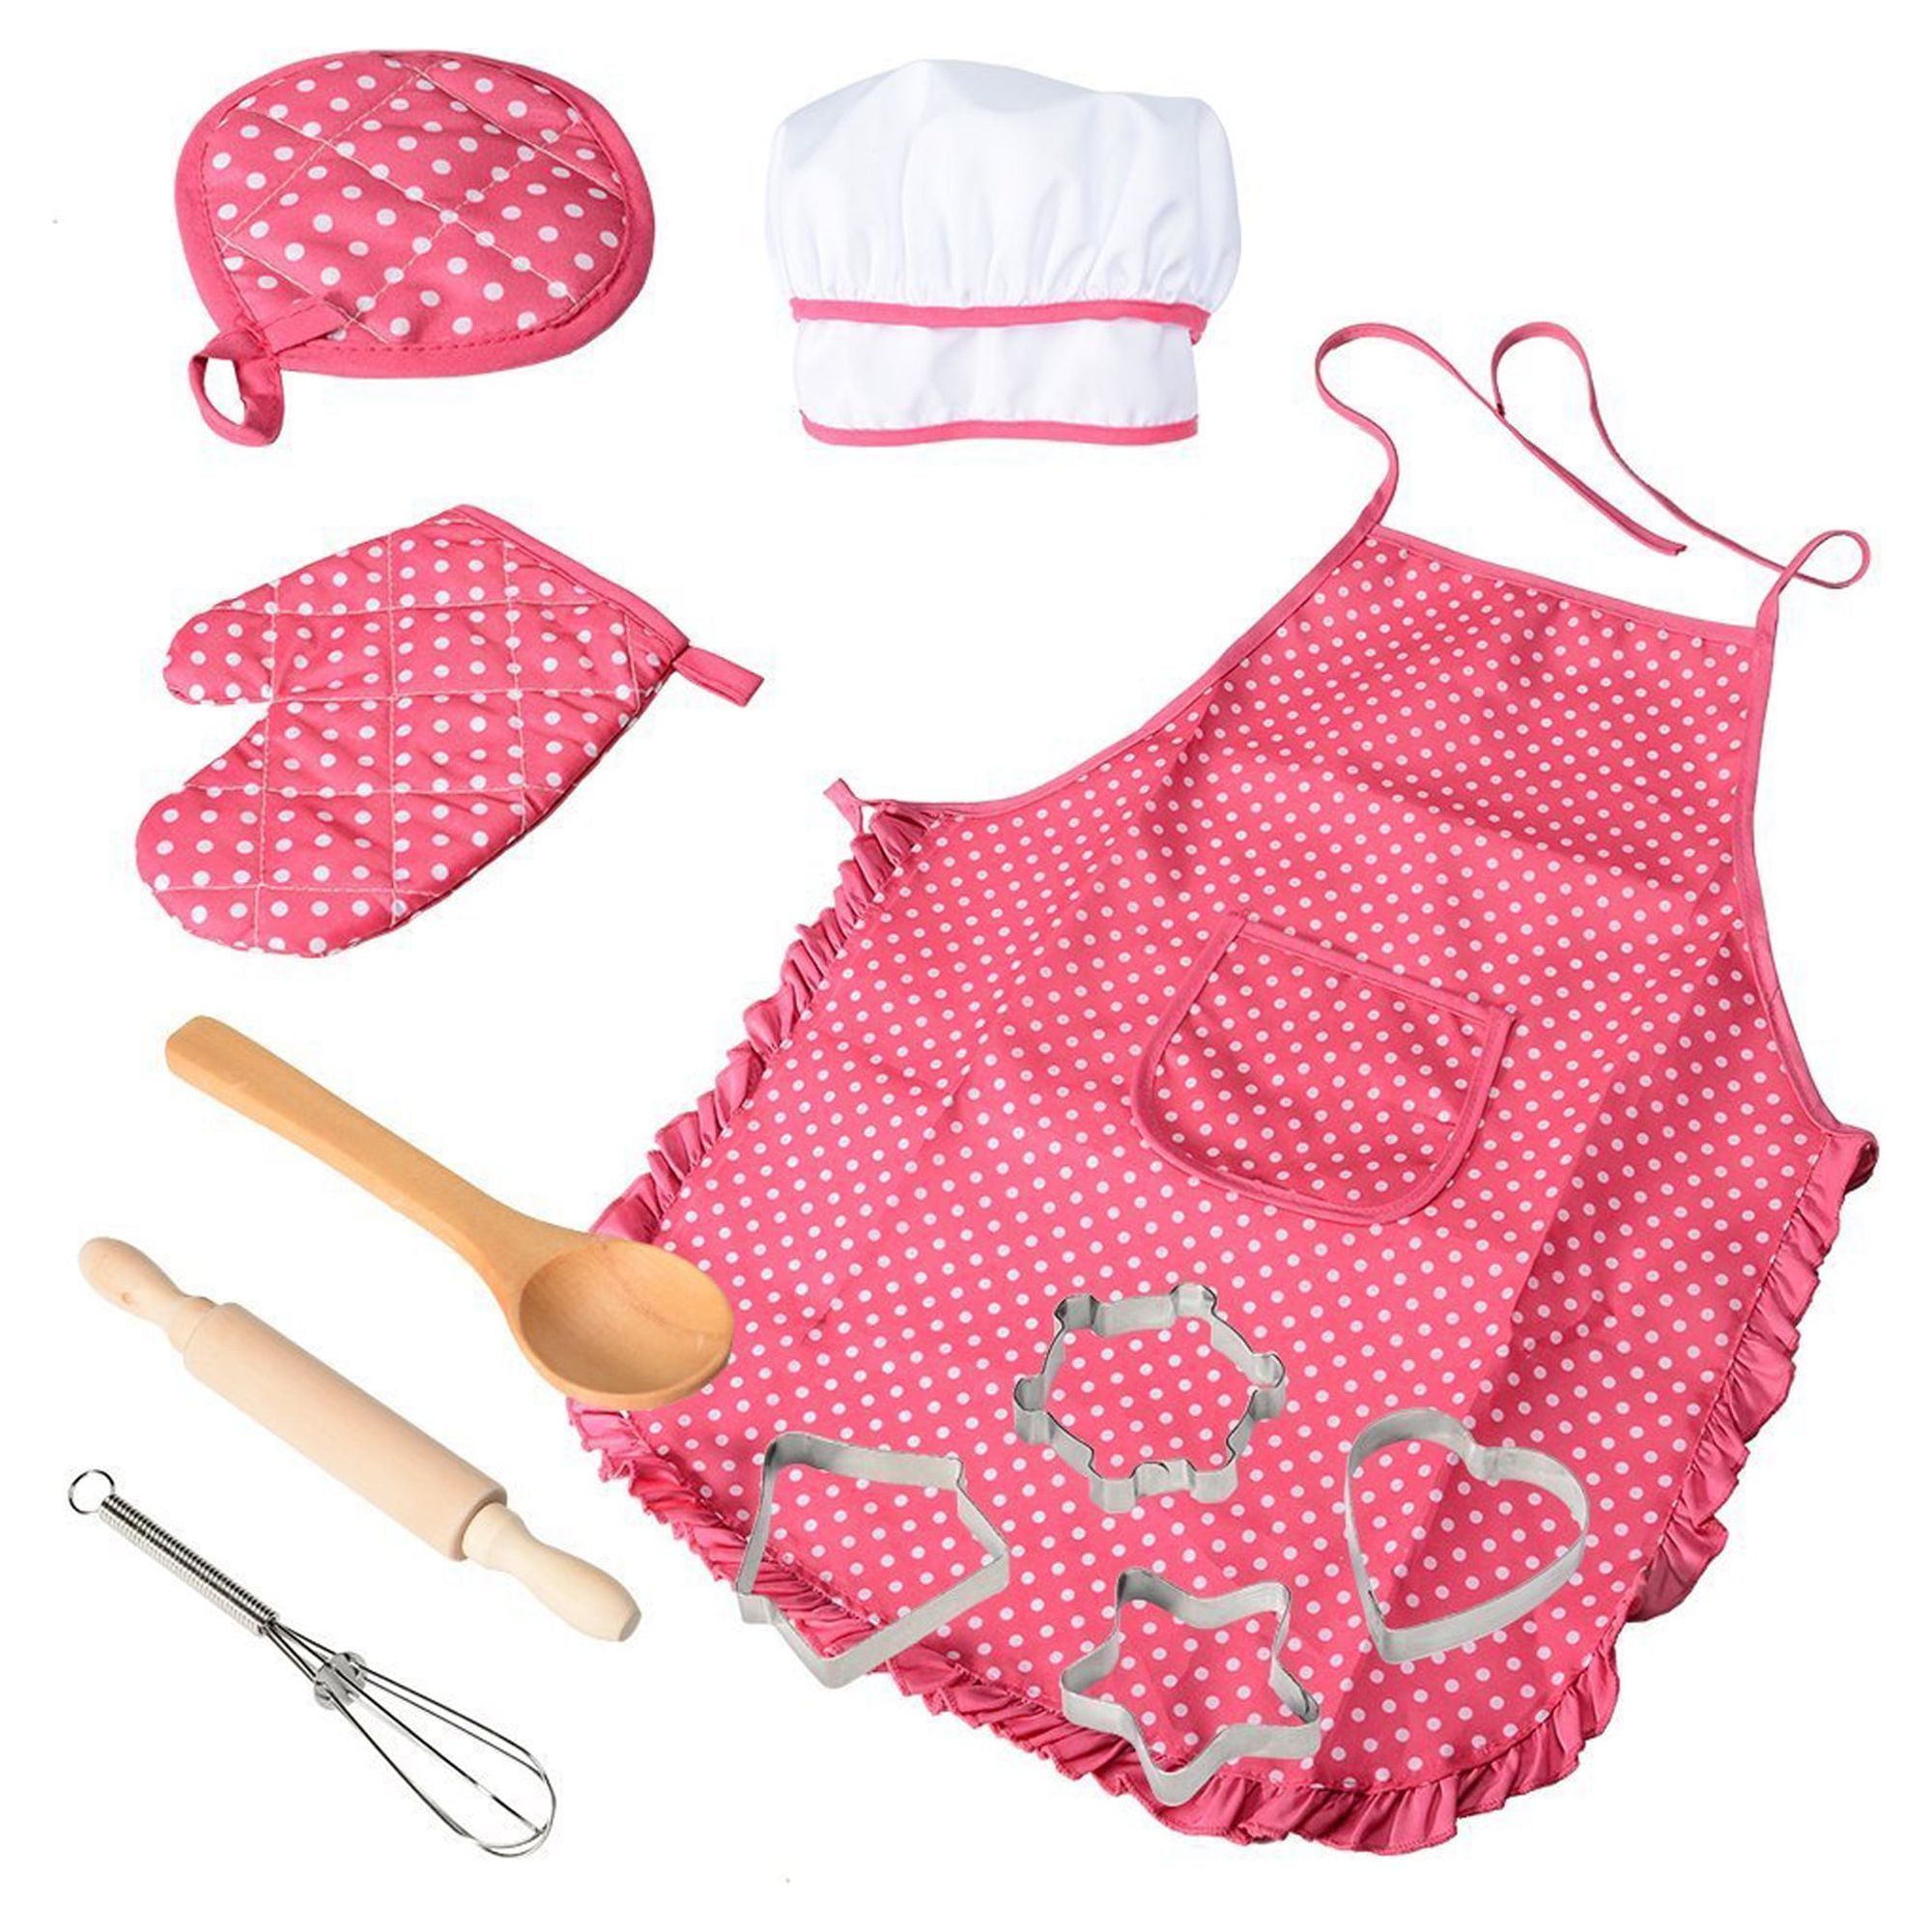 Gemeer Children's Cooking and Baking Set 34-Pcs Includes Apron for Little  Boys, Chef Hat, Oven Mitt & Utensil to Dress Up Chef Career Role Play for